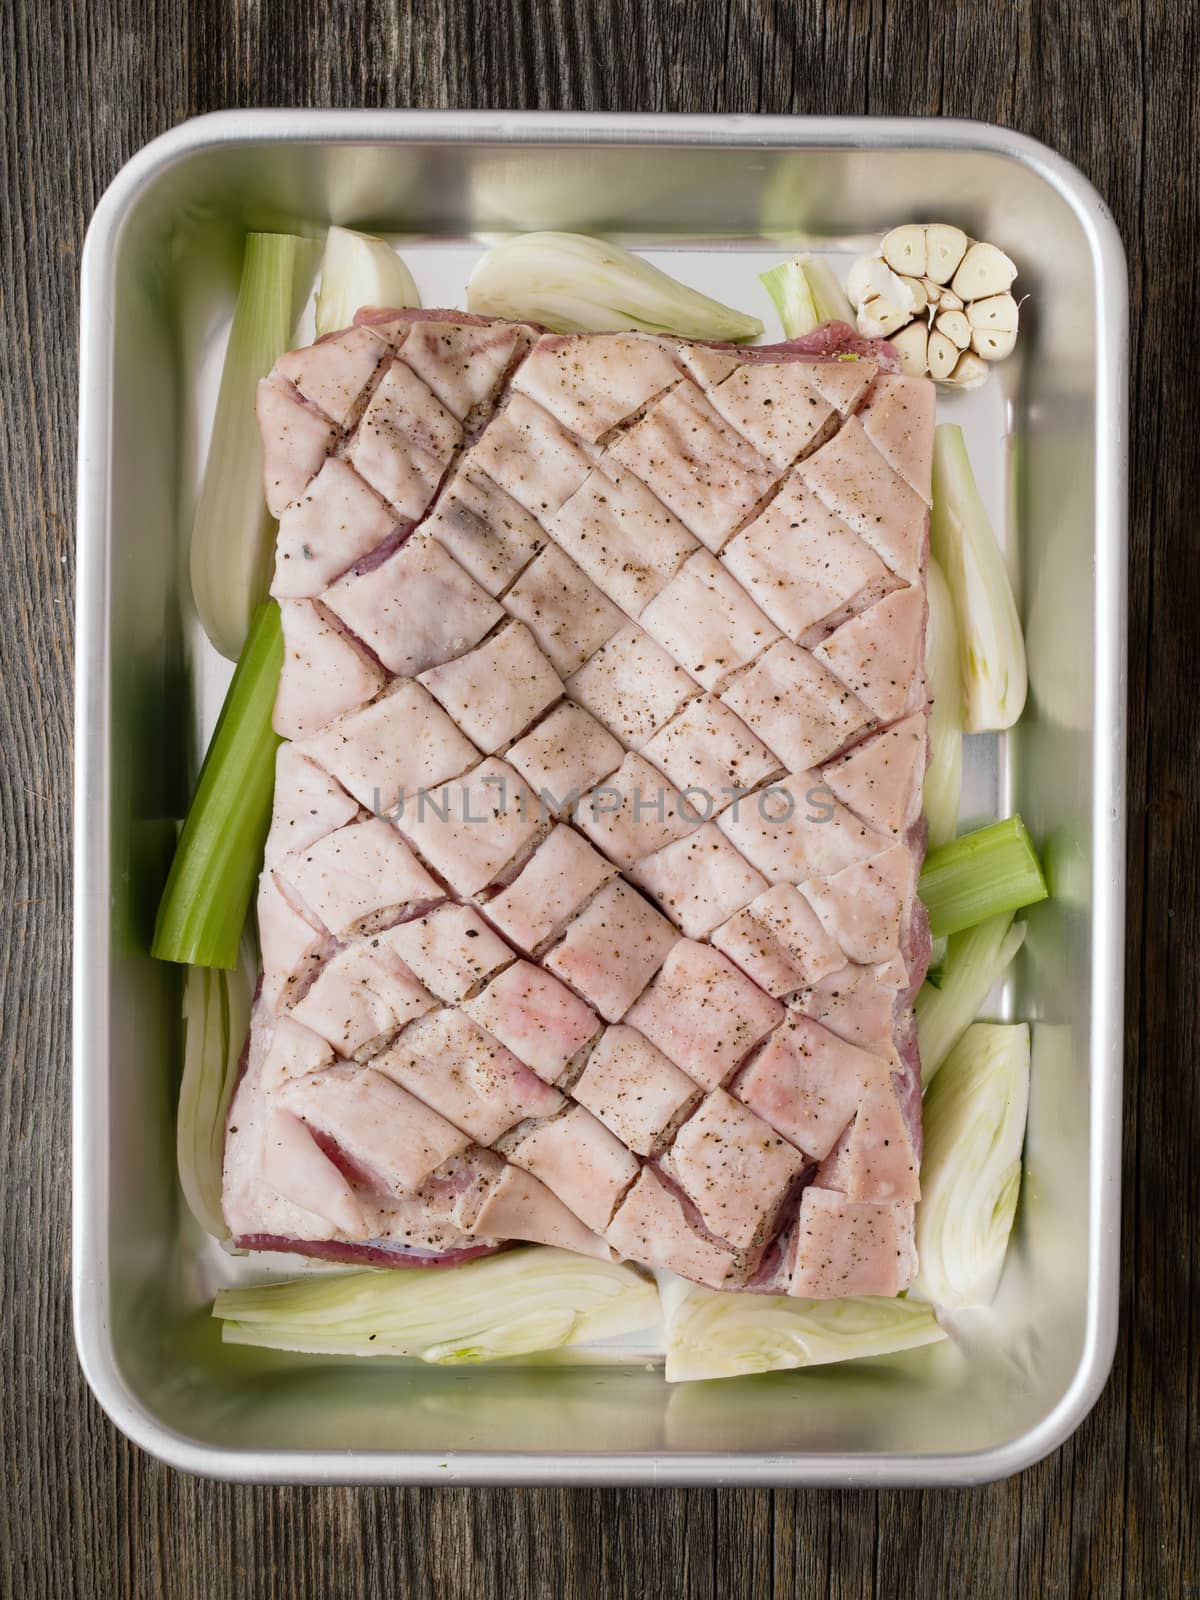 rustic raw uncooked seasoned pork belly by zkruger